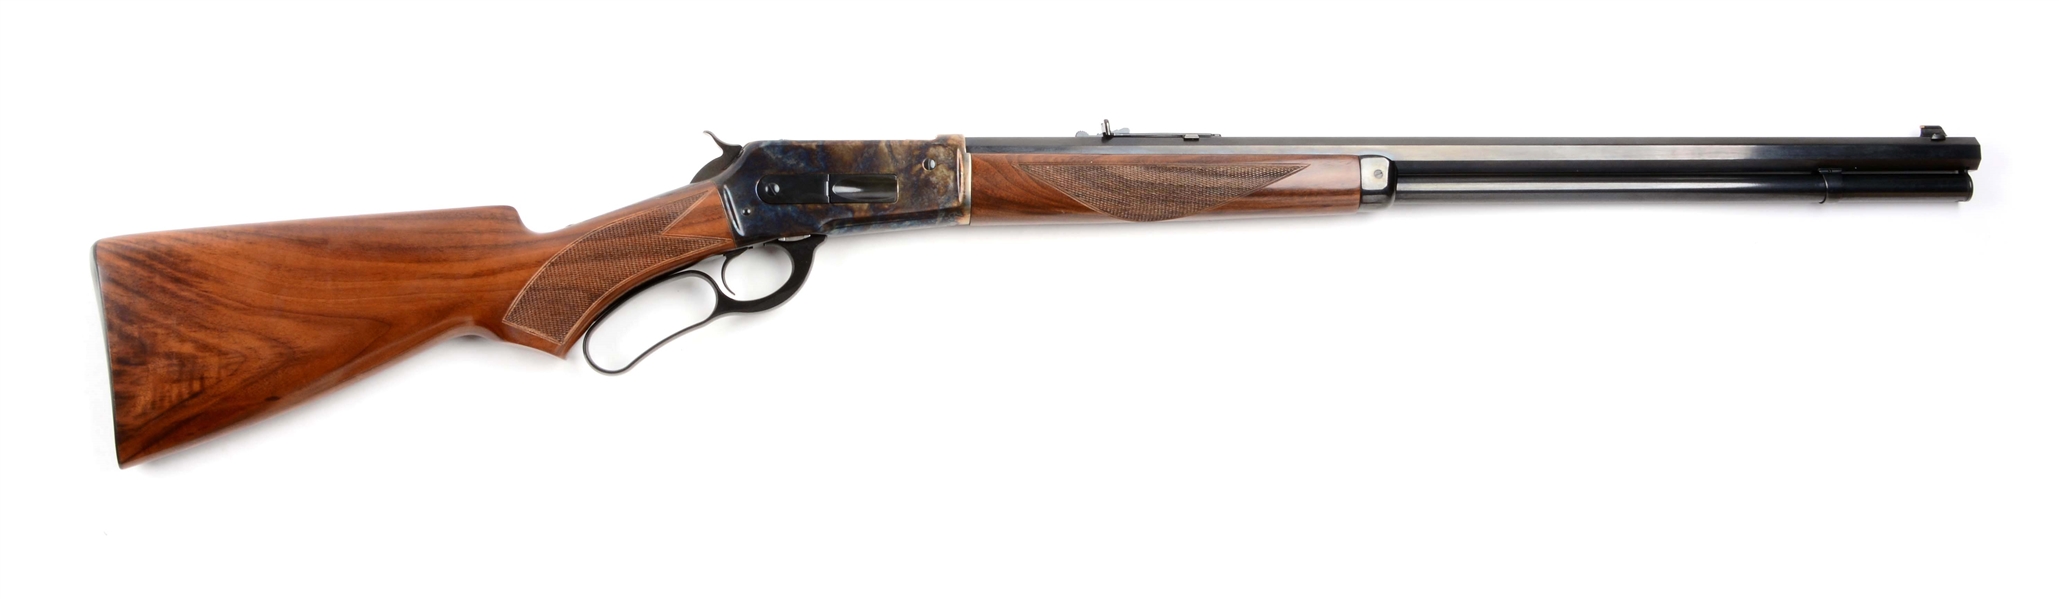 (M) MIB TAYLOR ARMS CO. 1886 DELUXE WINCHESTER STYLE REPLICA.